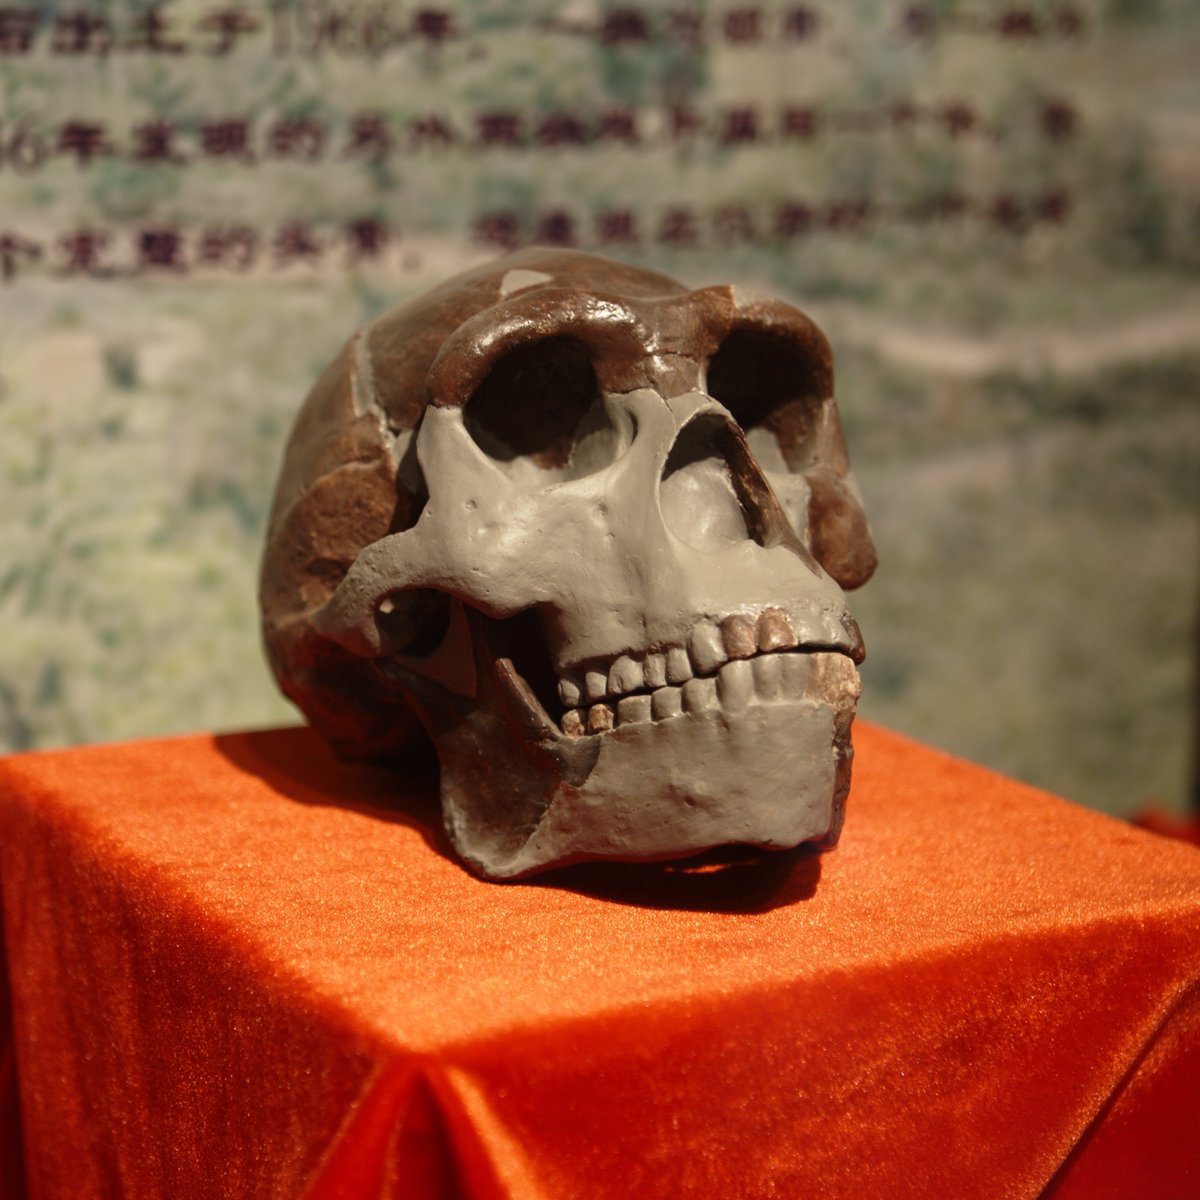 Homo erectus, including Peking Man, likely originated in East Africa 2 million years ago. The ancestry of East Asian populations is debated; some scholars suggest they descended from Homo sapiens who left Eastern Africa 60,000 to 100,000 years ago. #HumanOrigins #EastAsia